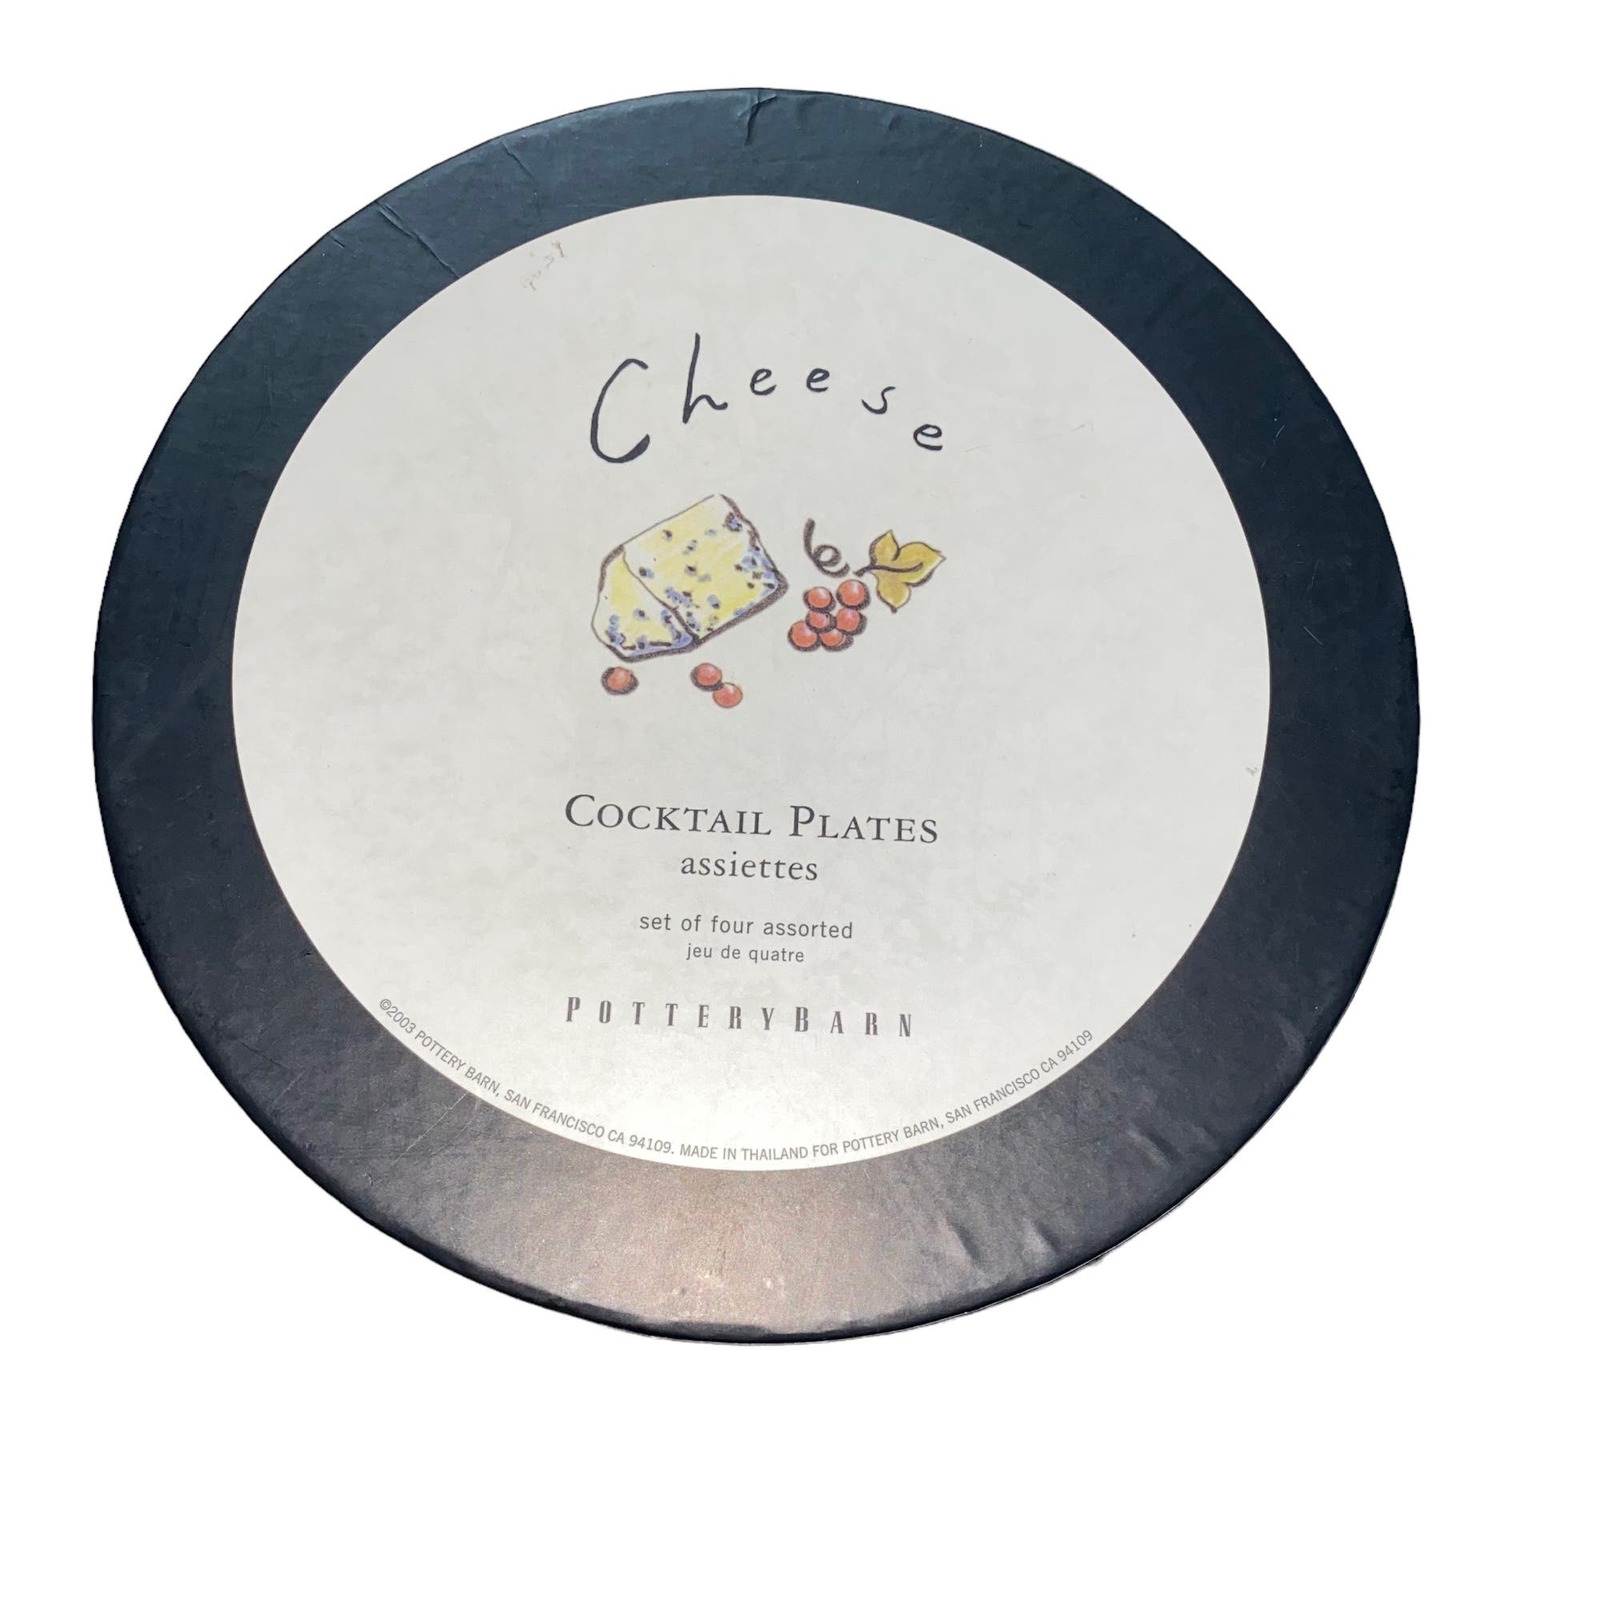 Pottery Barn Cheese Cocktail Plates set of four assorted 7.5" w/storage box 2003 - $37.01